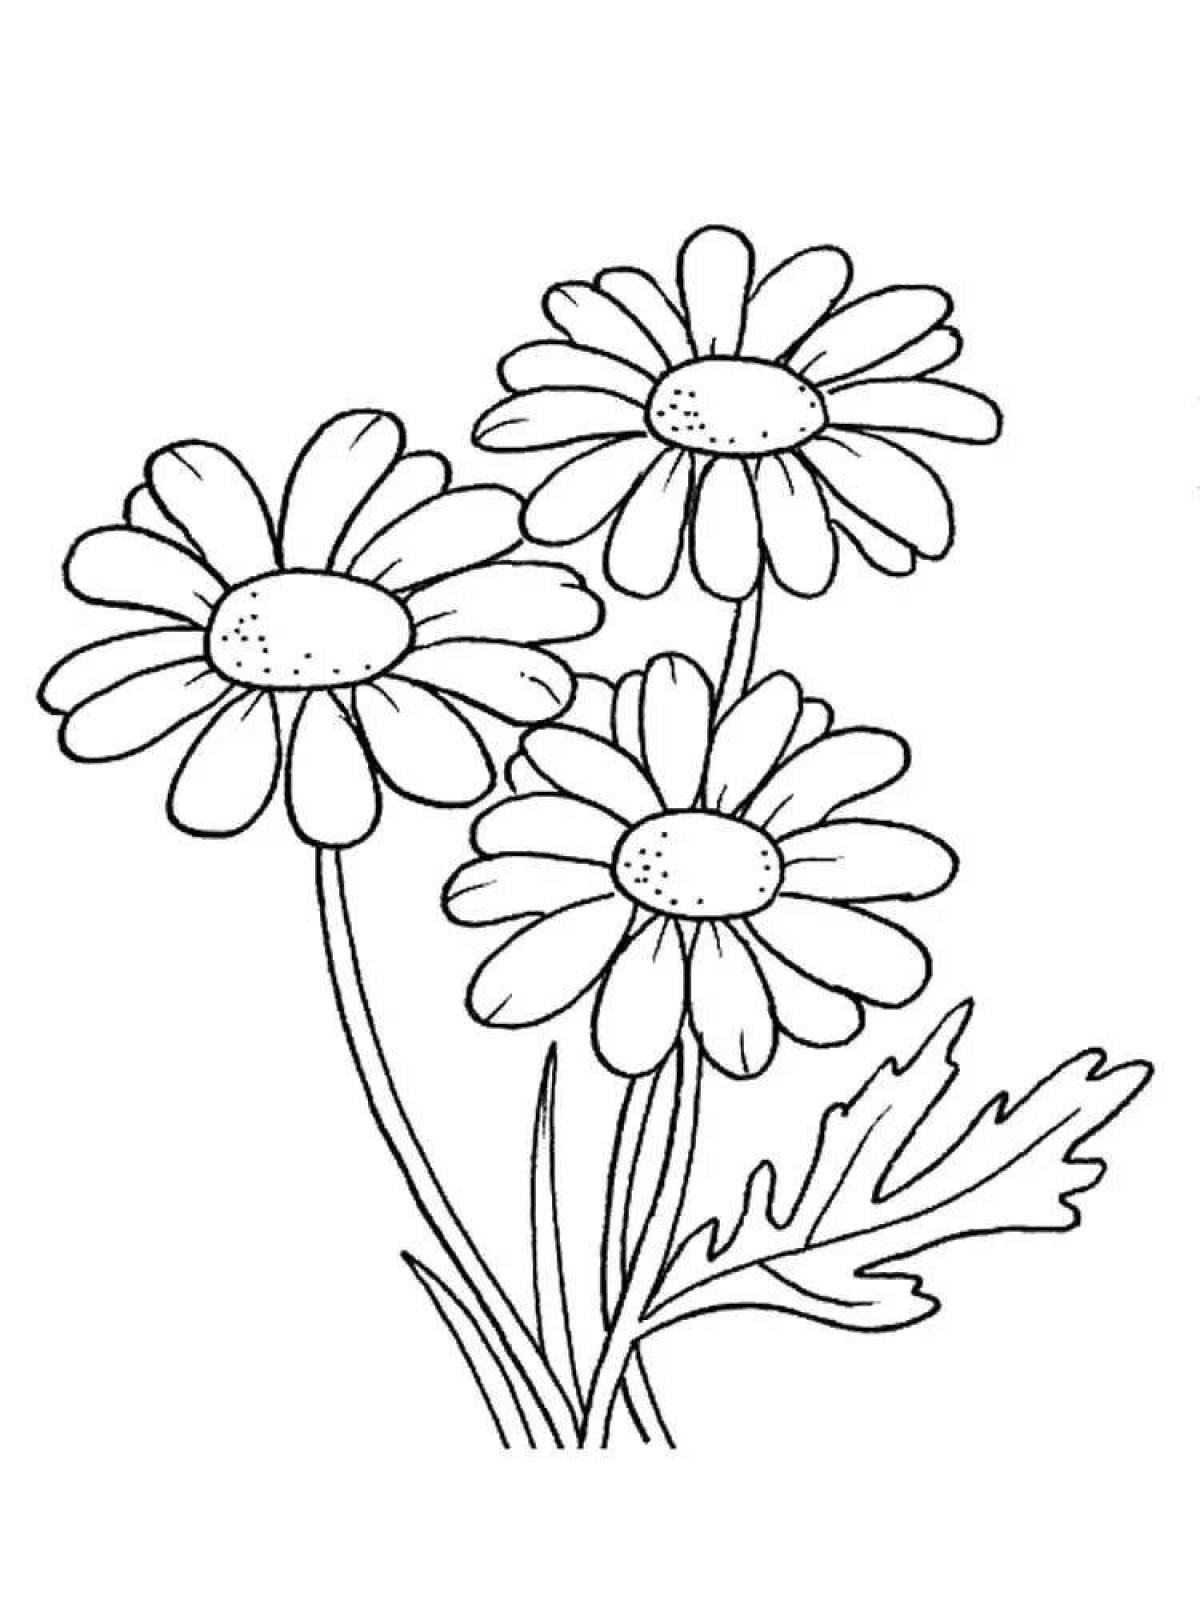 Coloring bright chamomile flower